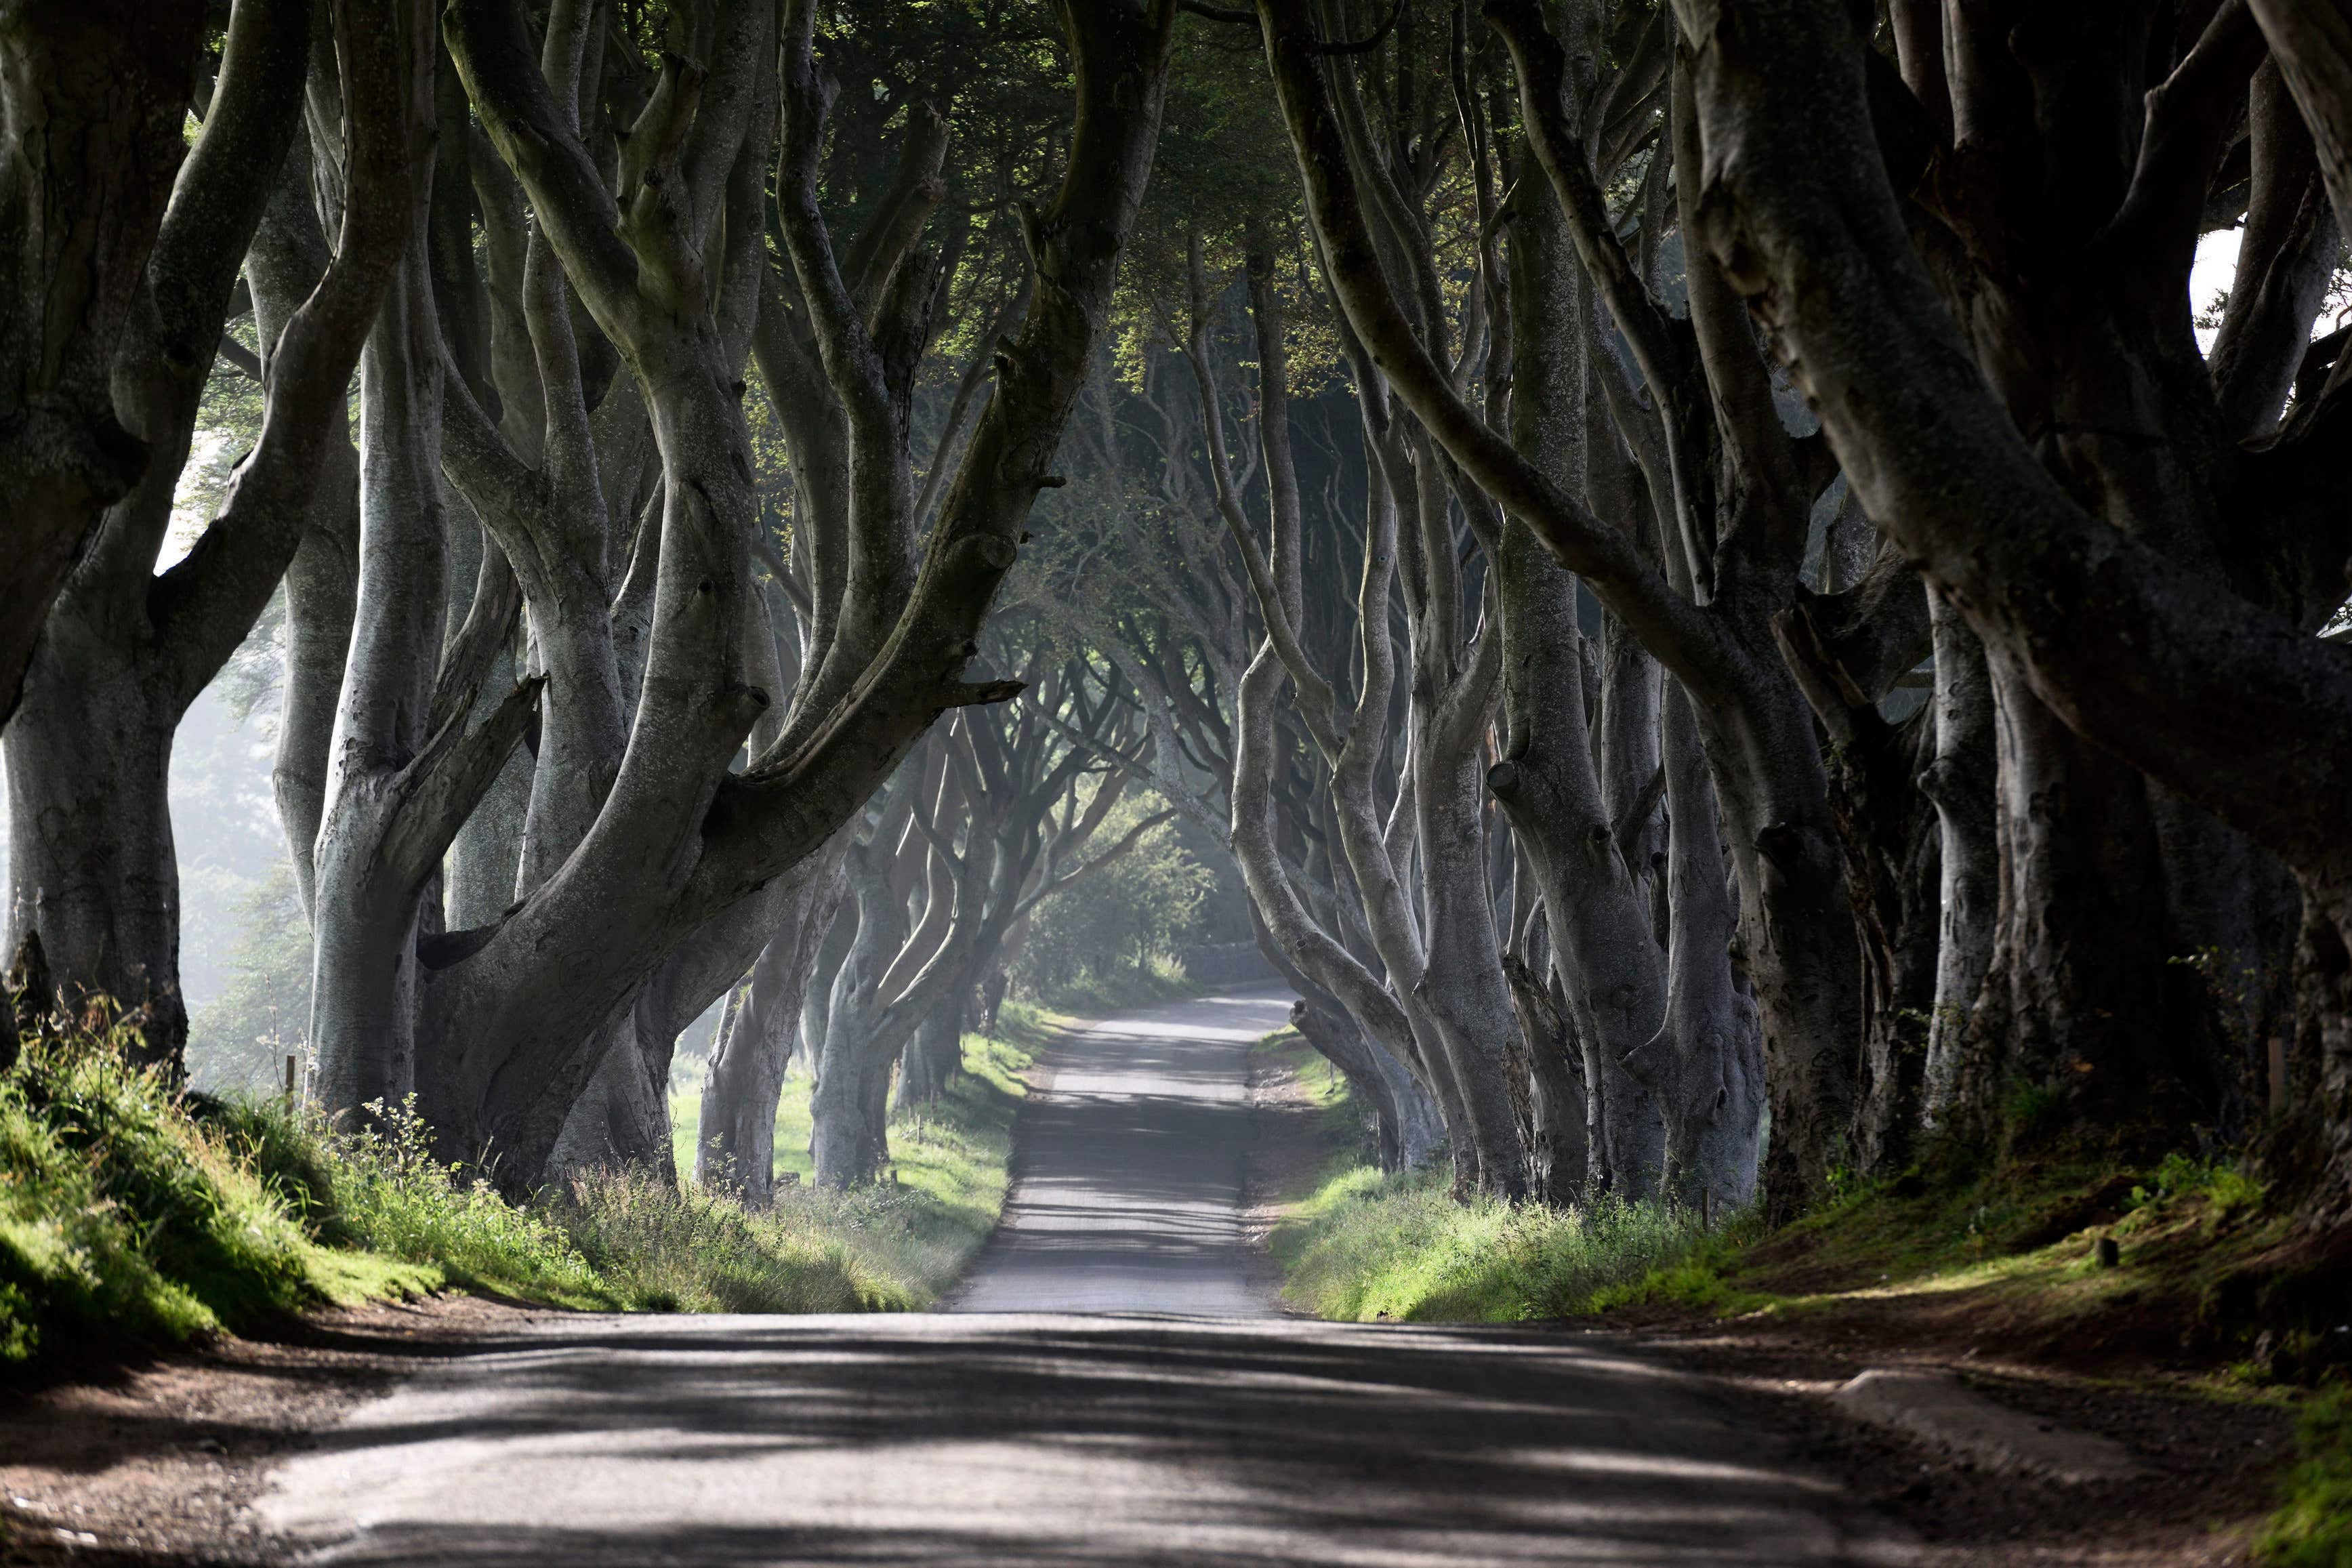 The Dark Hedges in Co Antrim were made famous by Game Of Thrones in 2012